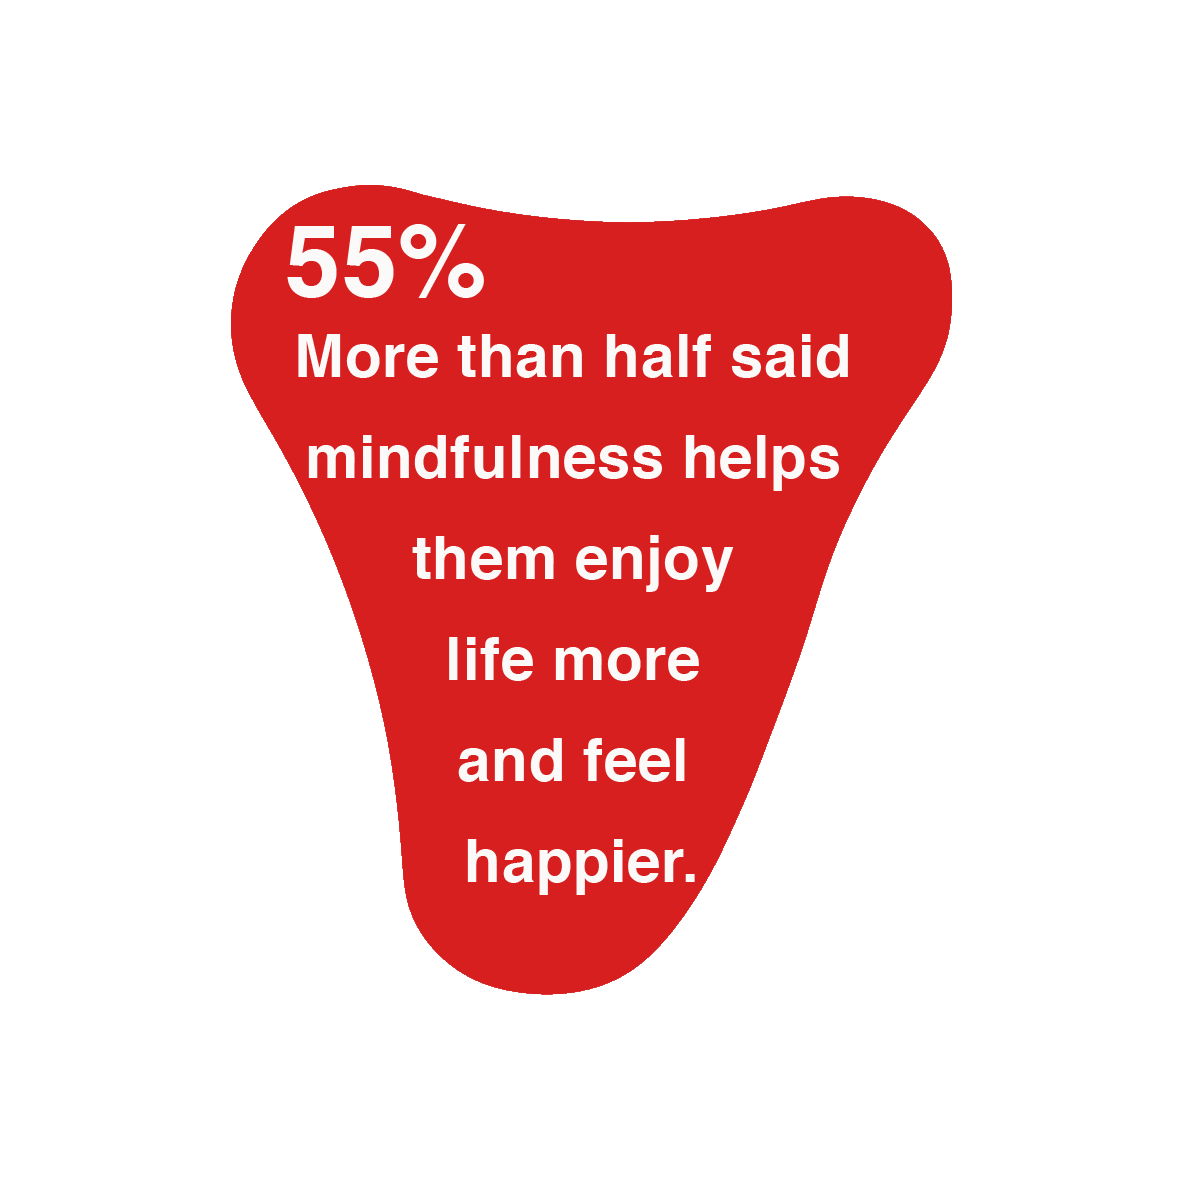 55% more than half said mindfulness helps them enjoy life more and feel happier.